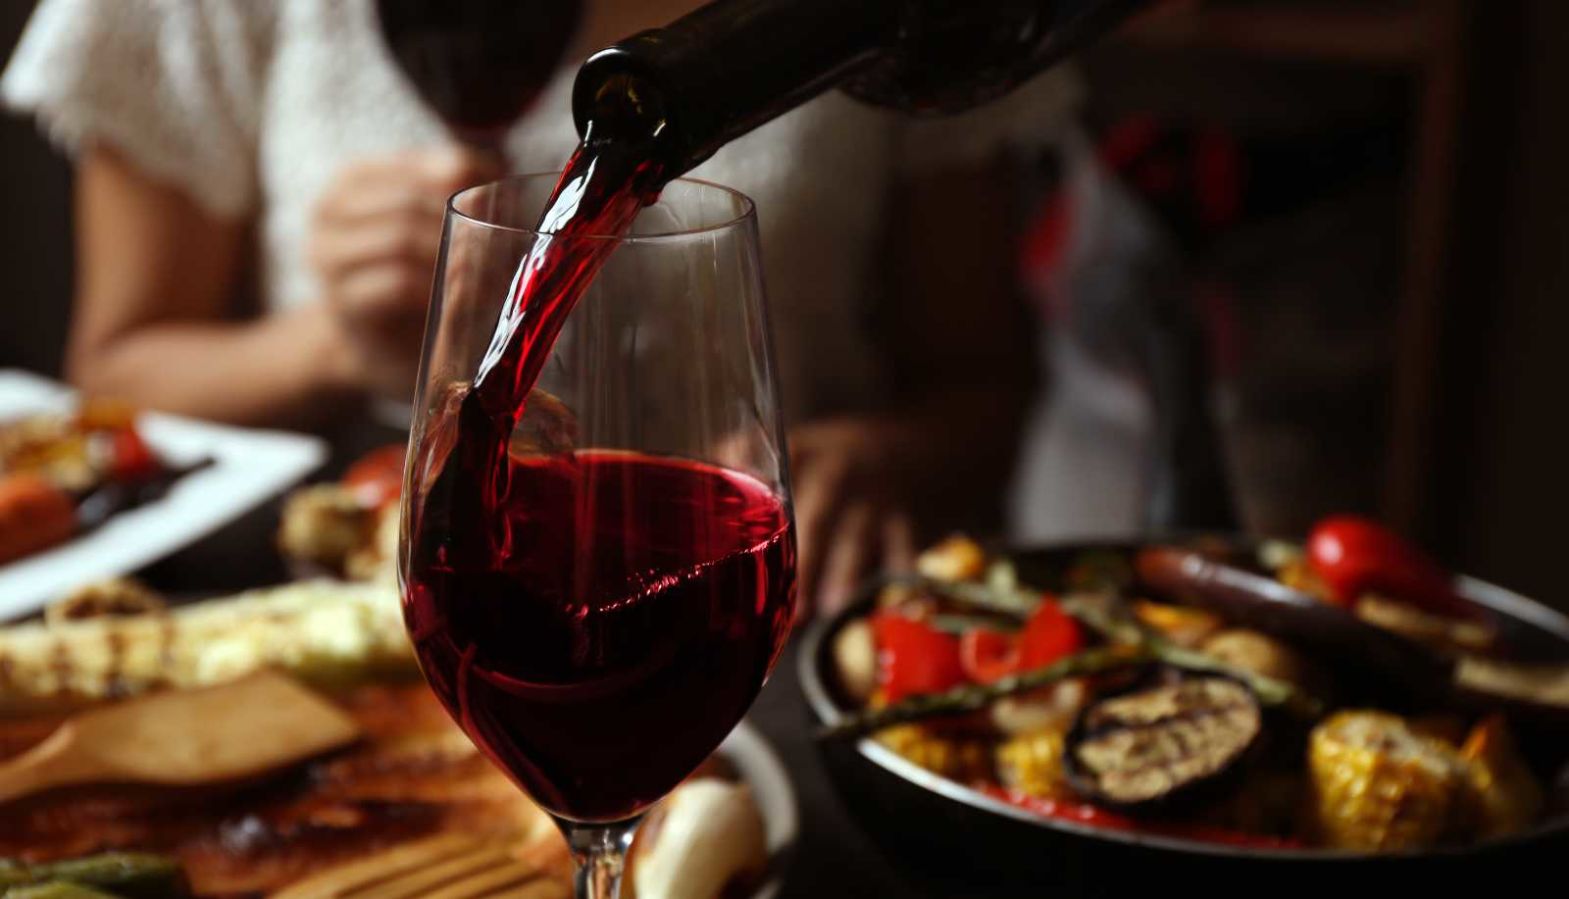 Vegan wine - a glass of red wine is poured at a dining table